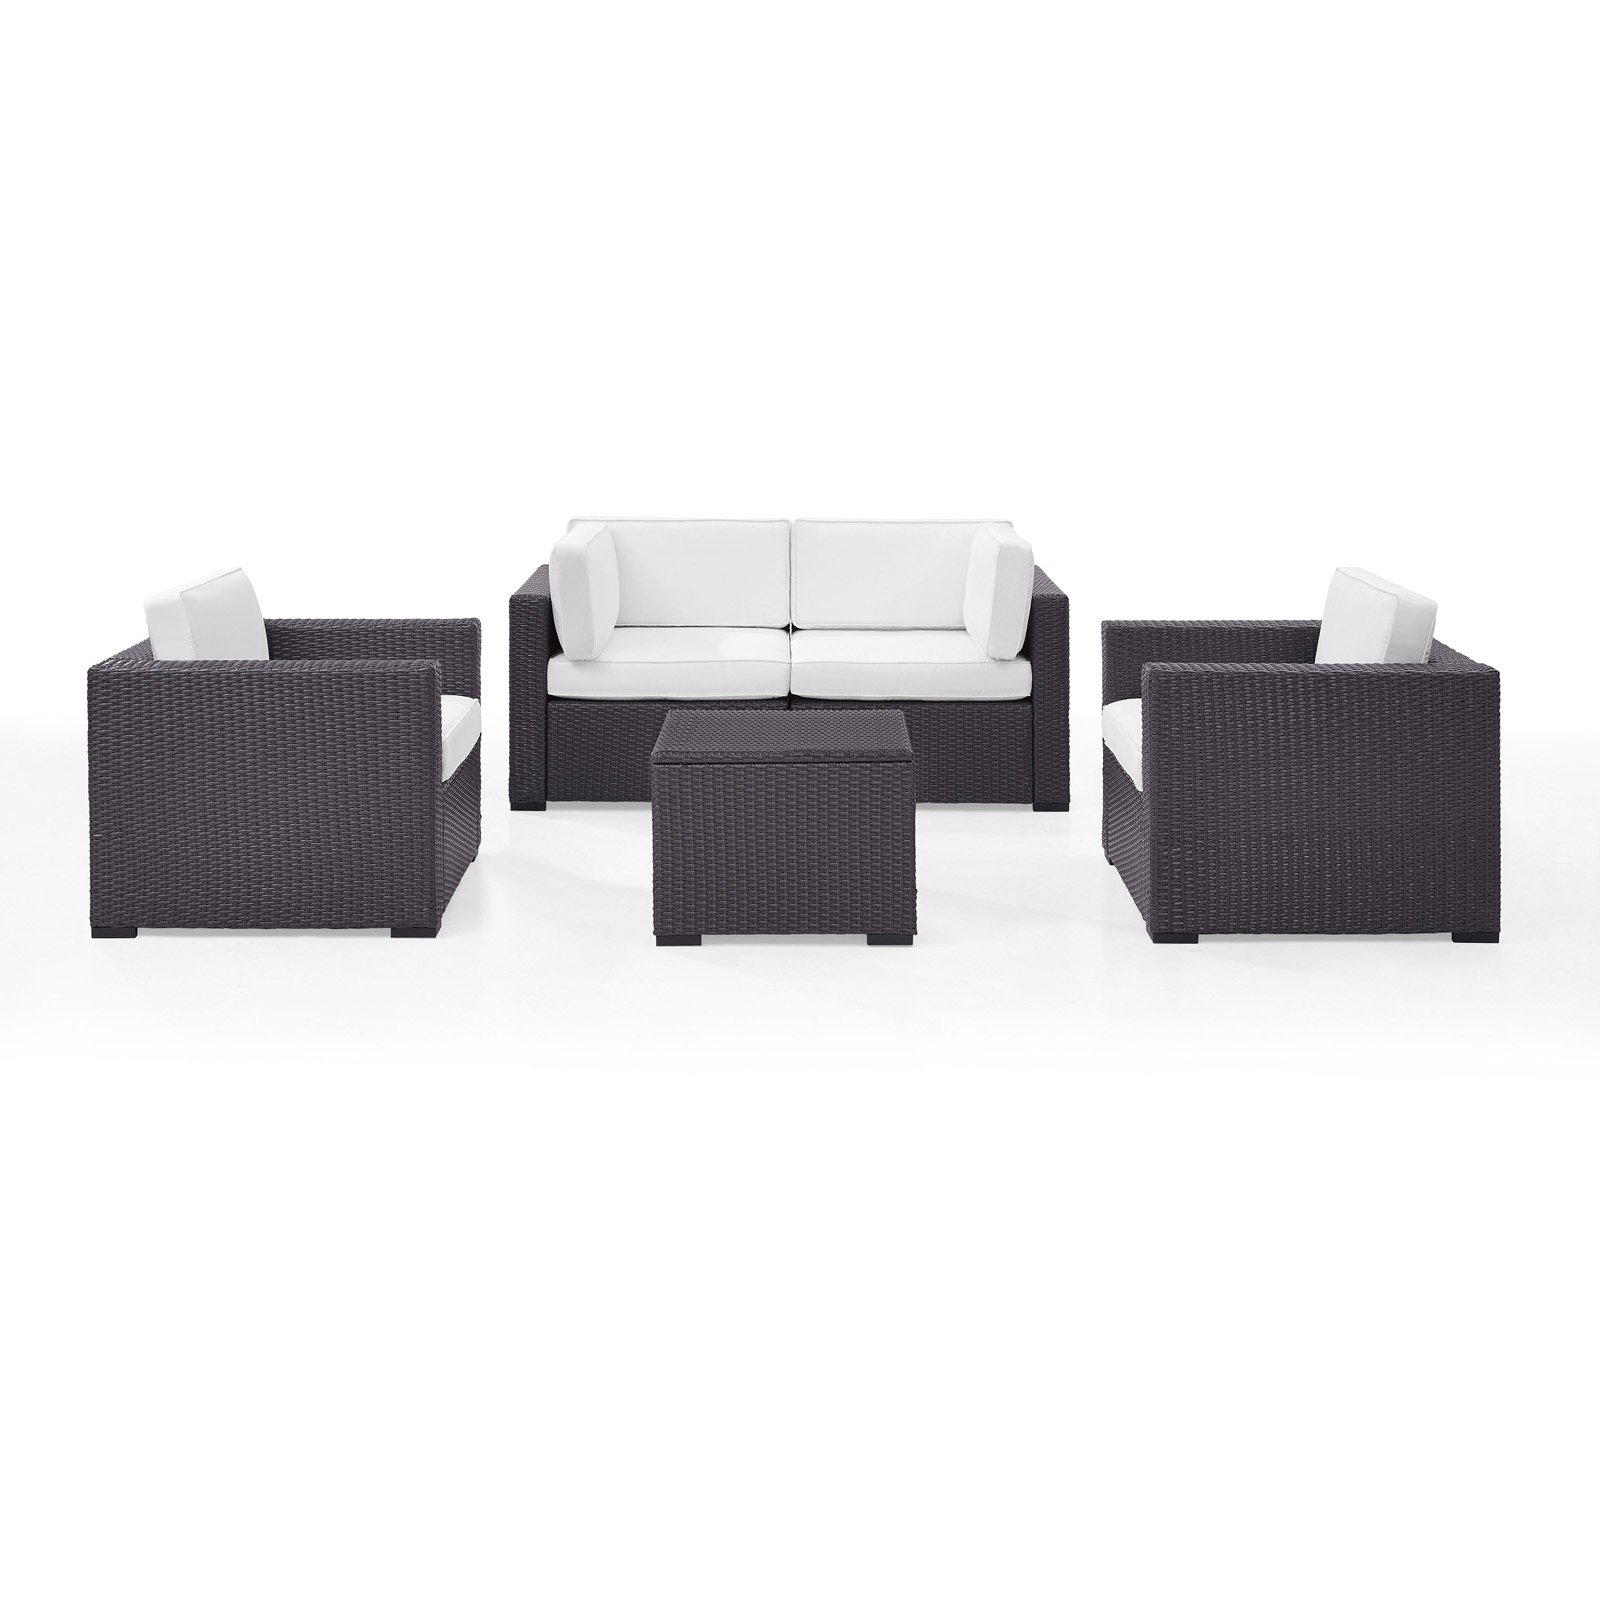 Crosley Furniture Biscayne 5 Piece Metal Patio Sofa Set in Brown/White - image 1 of 11